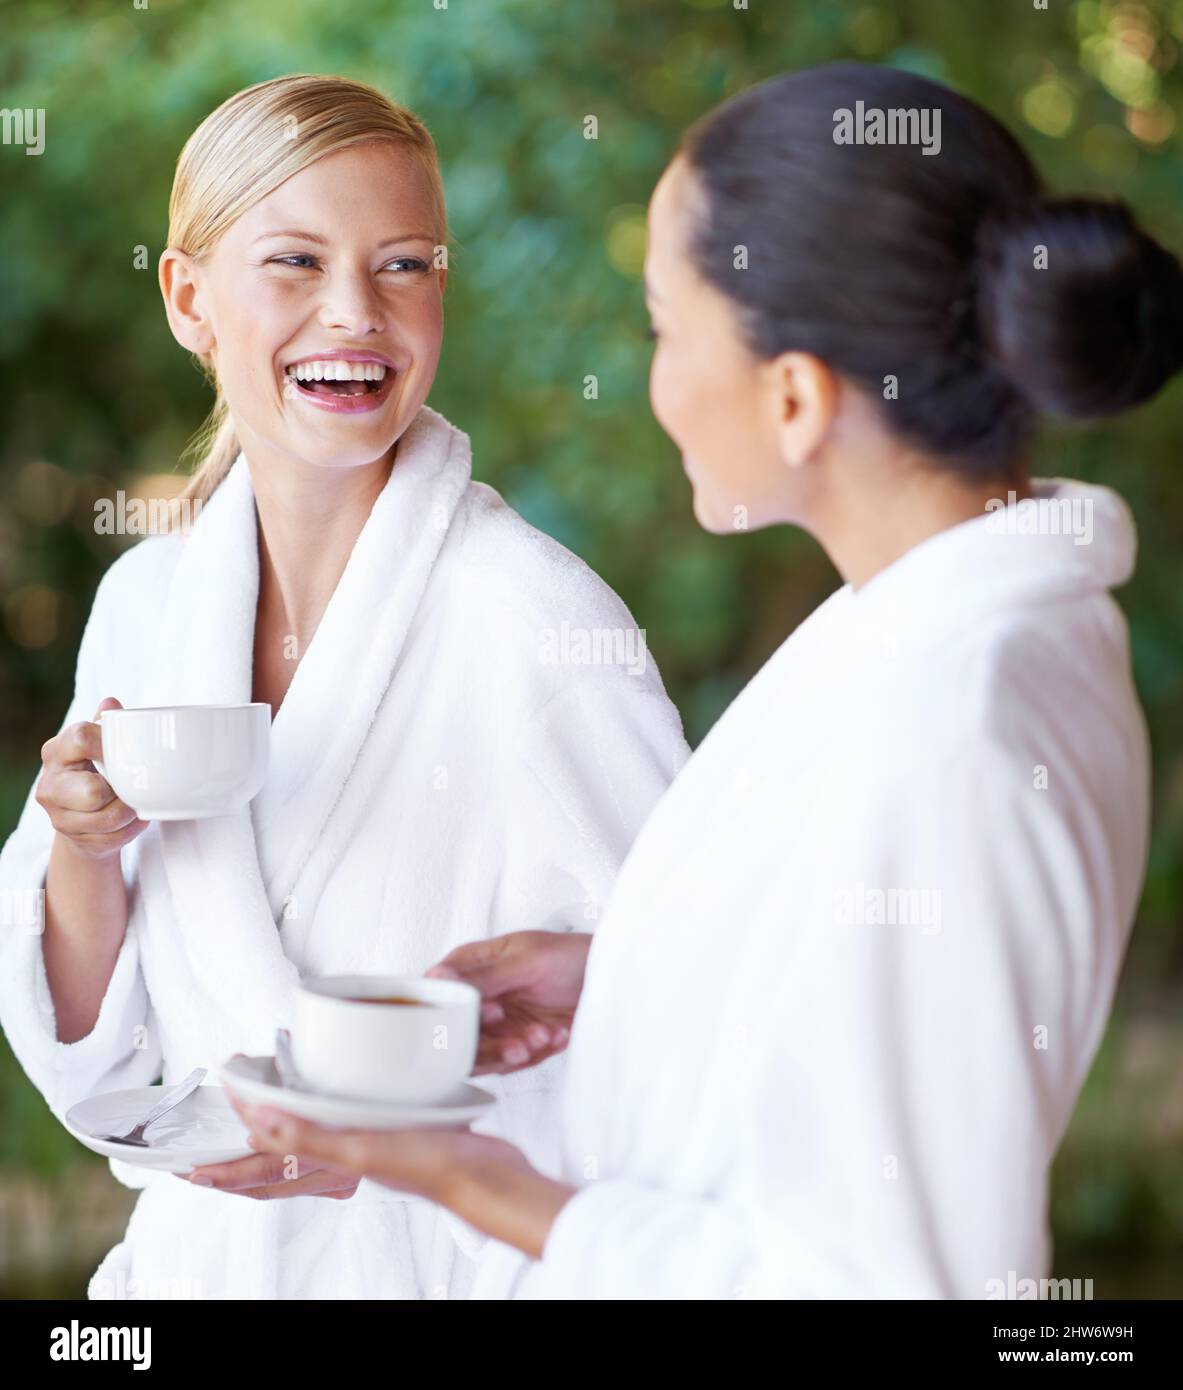 Enjoying a pampering session with a good friend. Two young women having coffee in their bathrobes at the spa. Stock Photo